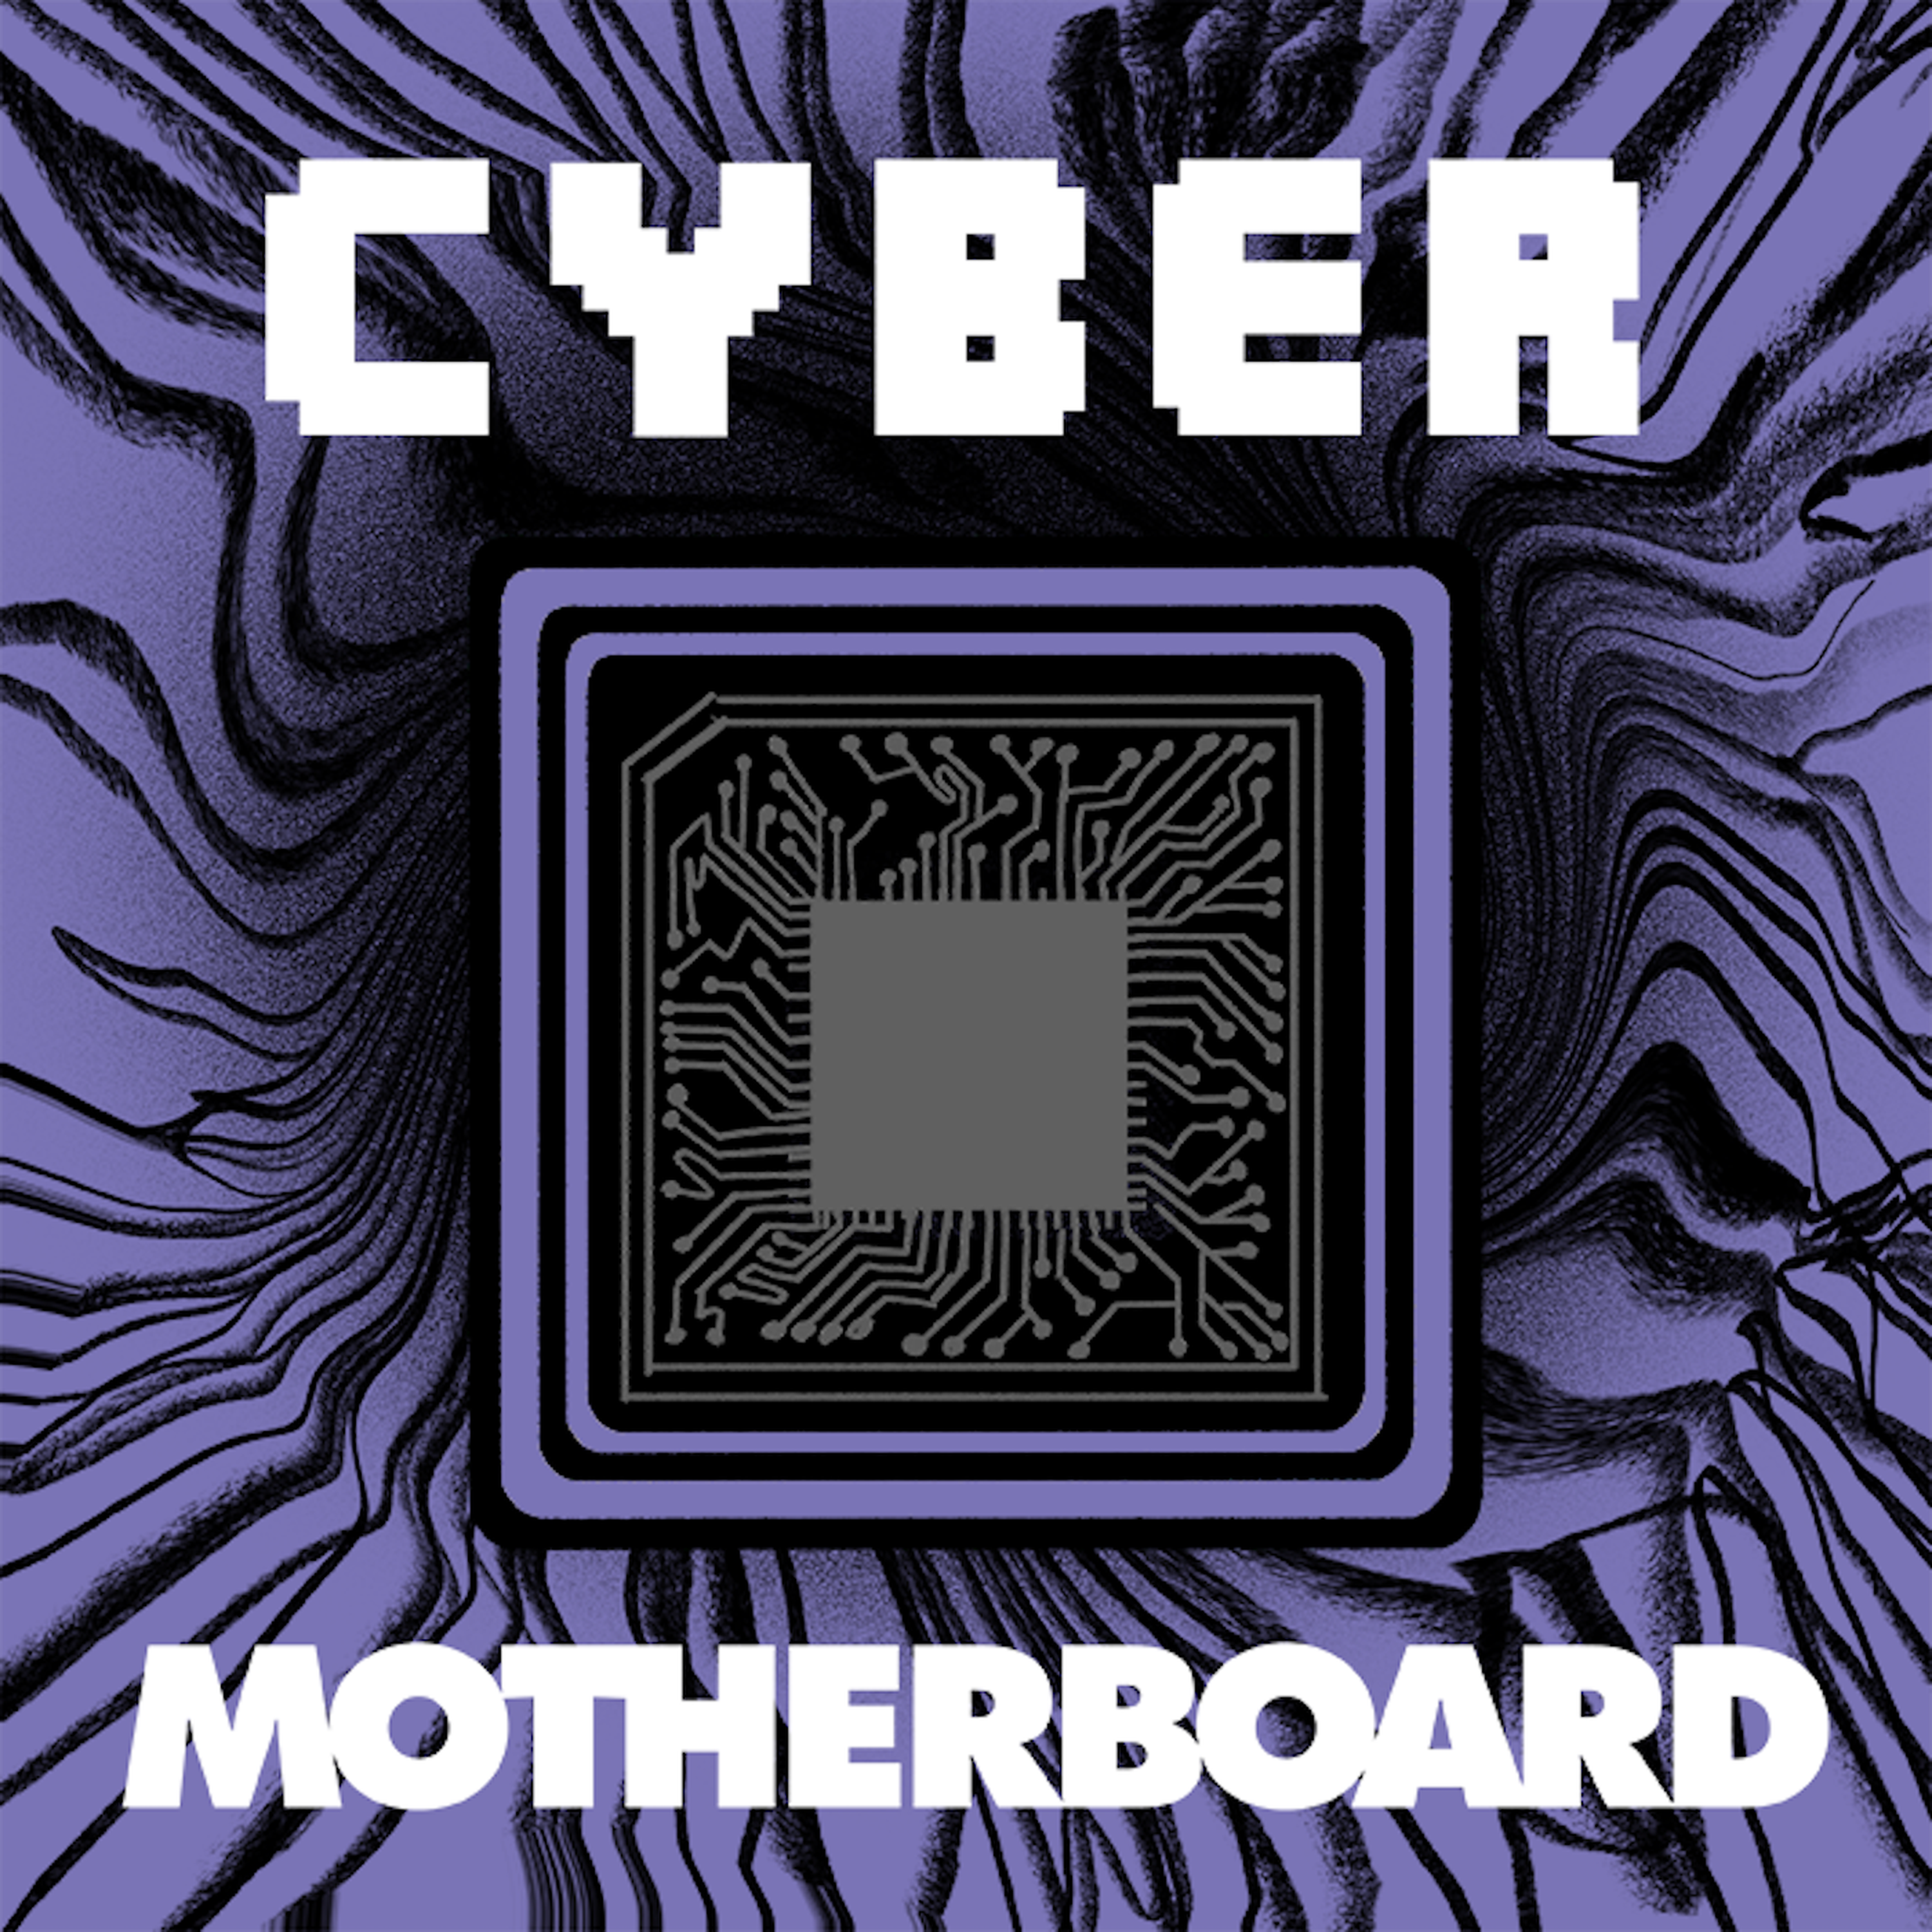 [Bonus] Introducing CYBER, a Hacking Podcast by Motherboard